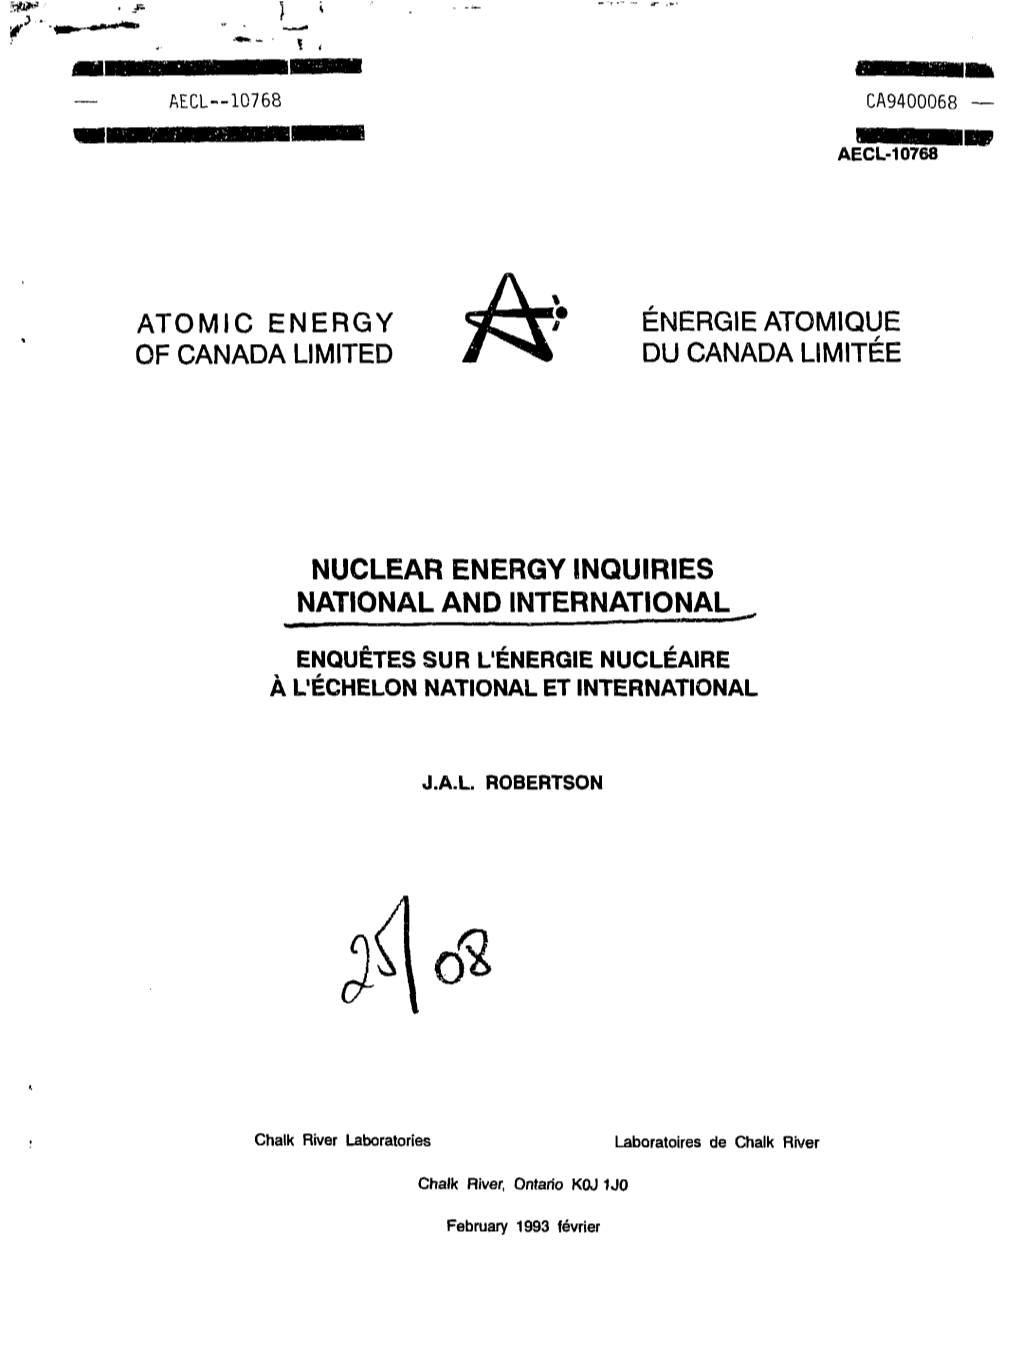 Atomic Energy of Canada Limited Energieatomique Du